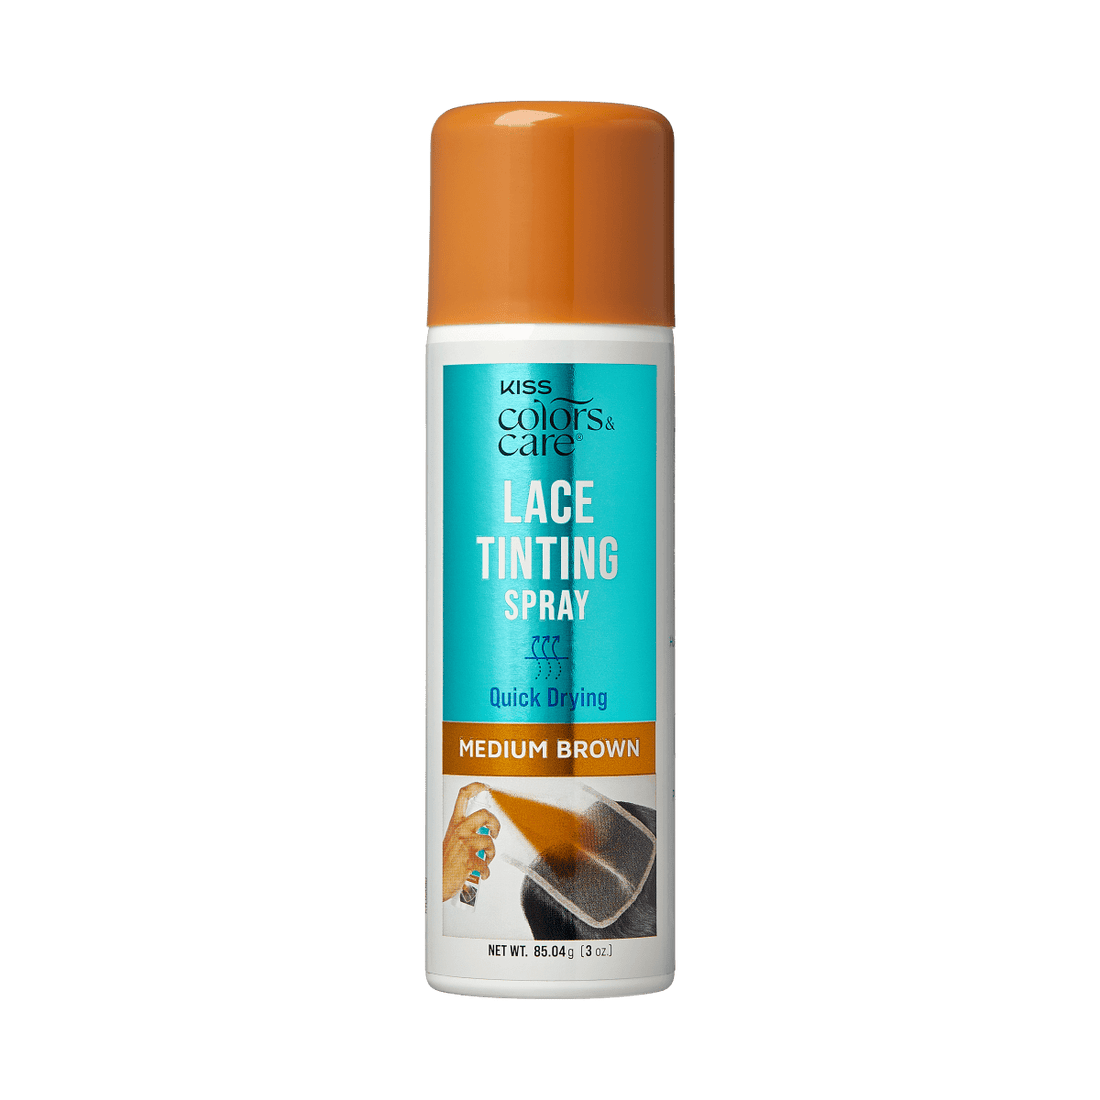 KISS Colors &amp; Care Lace Tinting Spray - Medium Brown